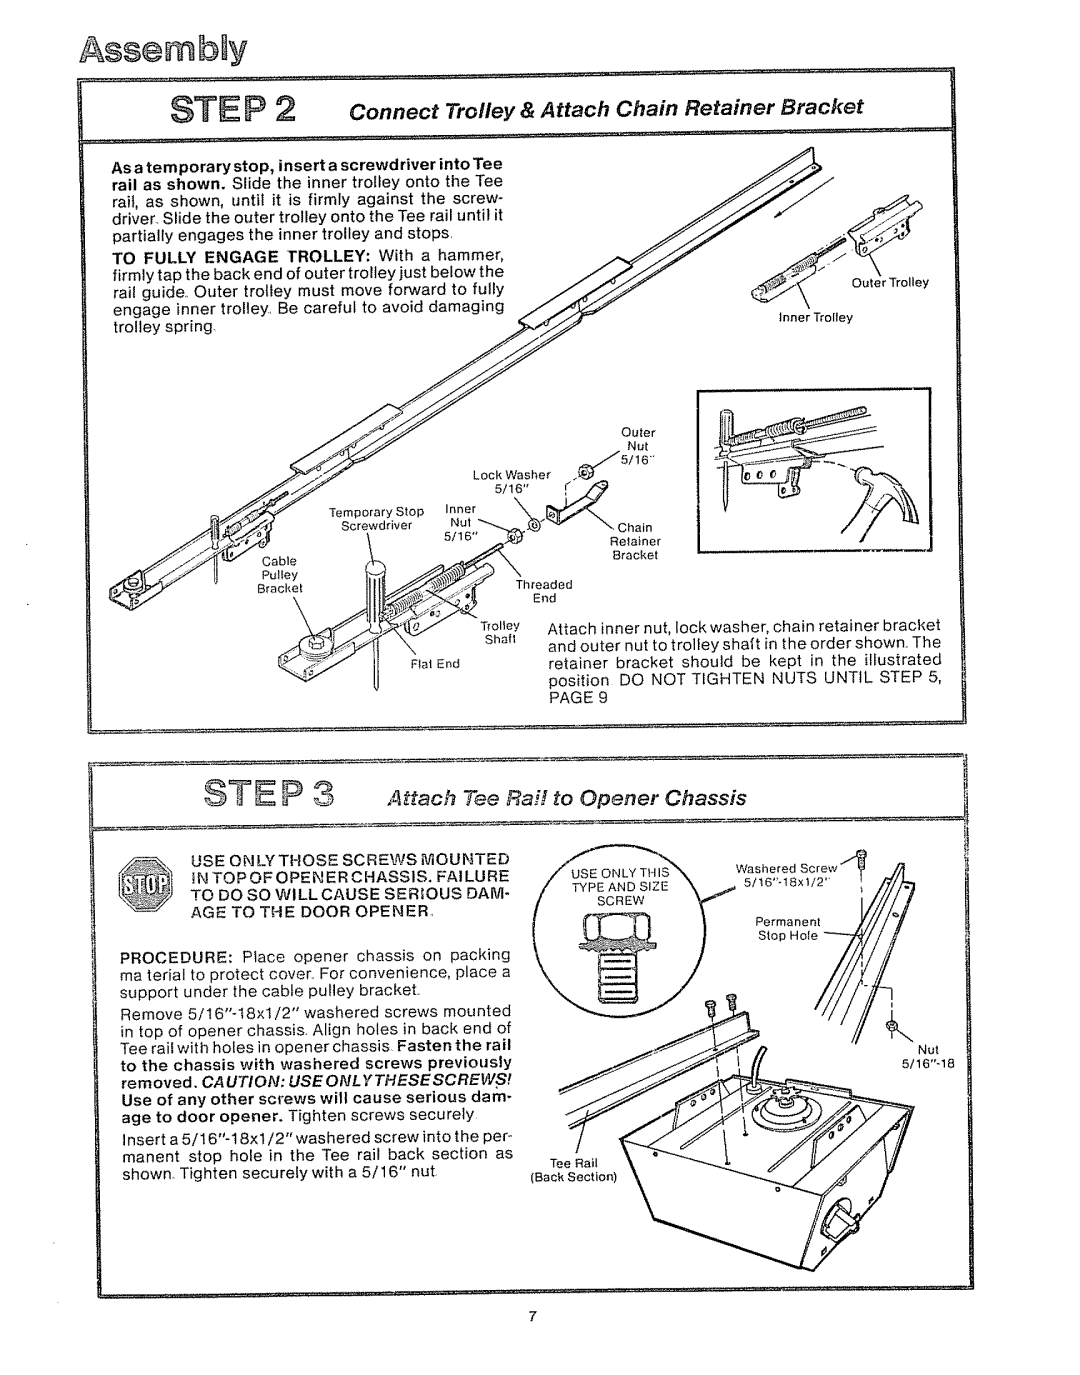 Craftsman 39535006 specifications Assemb, S=E P 2 Connect Trolley & Attach Chain Retainer Bracket 